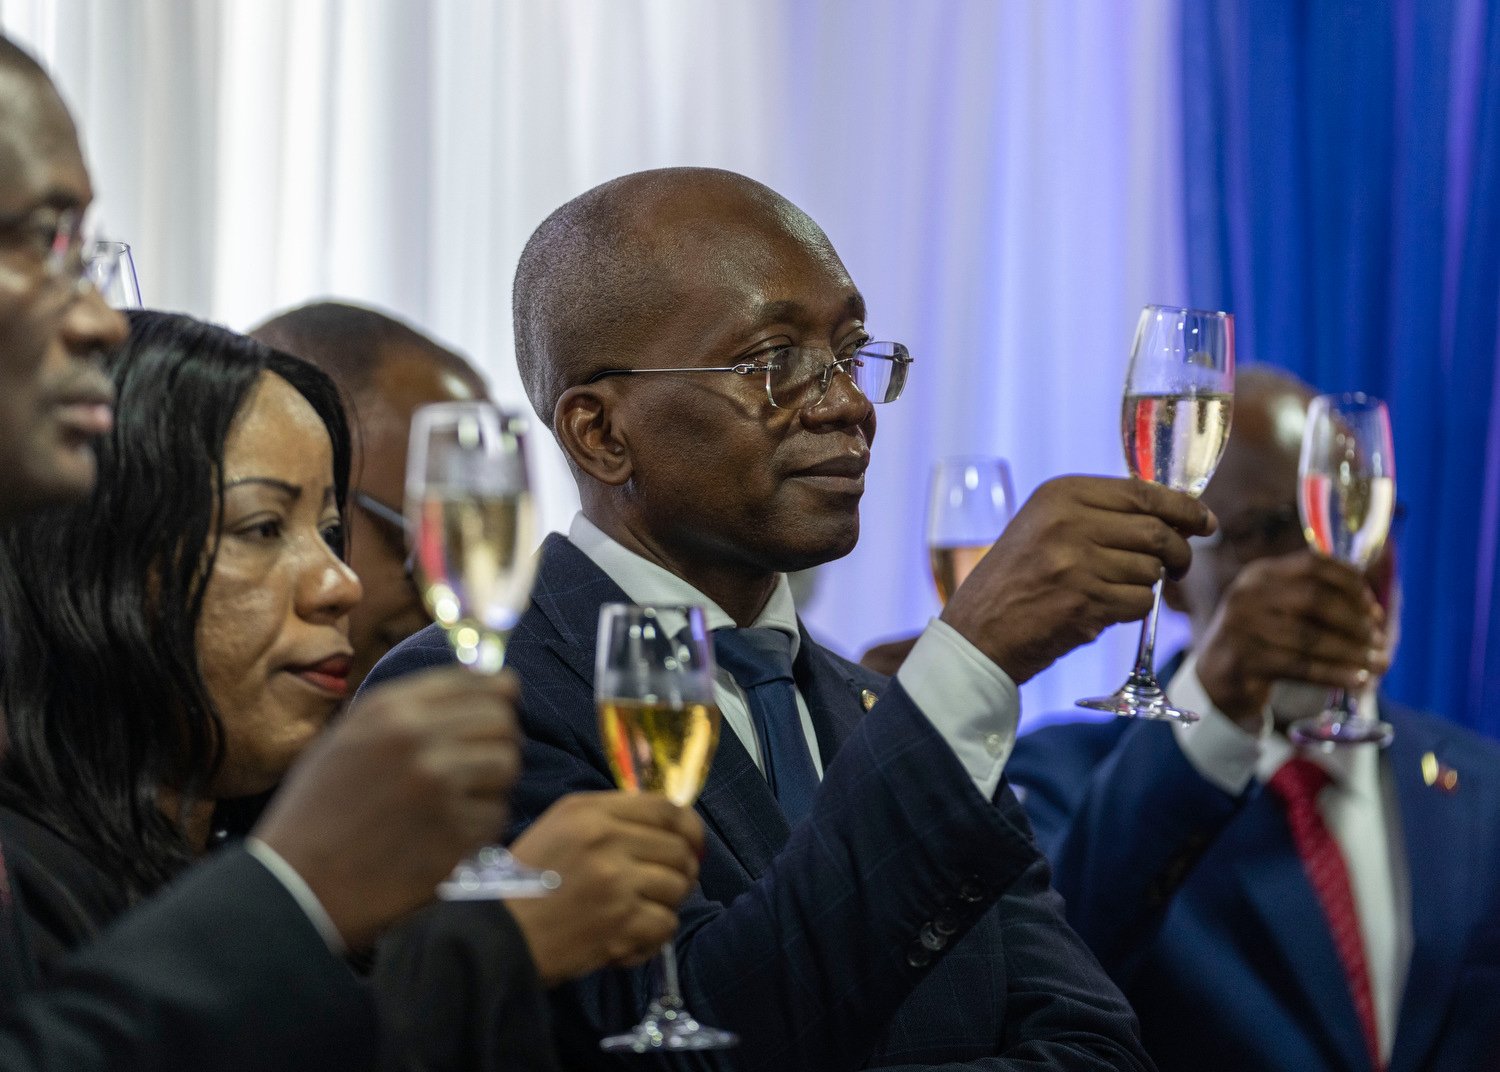  Michel Patrick Boisvert, who was named interim prime minister, toasts during the swearing-in ceremony of the transitional council that is tasked with selecting a new prime minister and cabinet in Port-au-Prince, Haiti, April 25, 2024. (AP Photo/Ramo